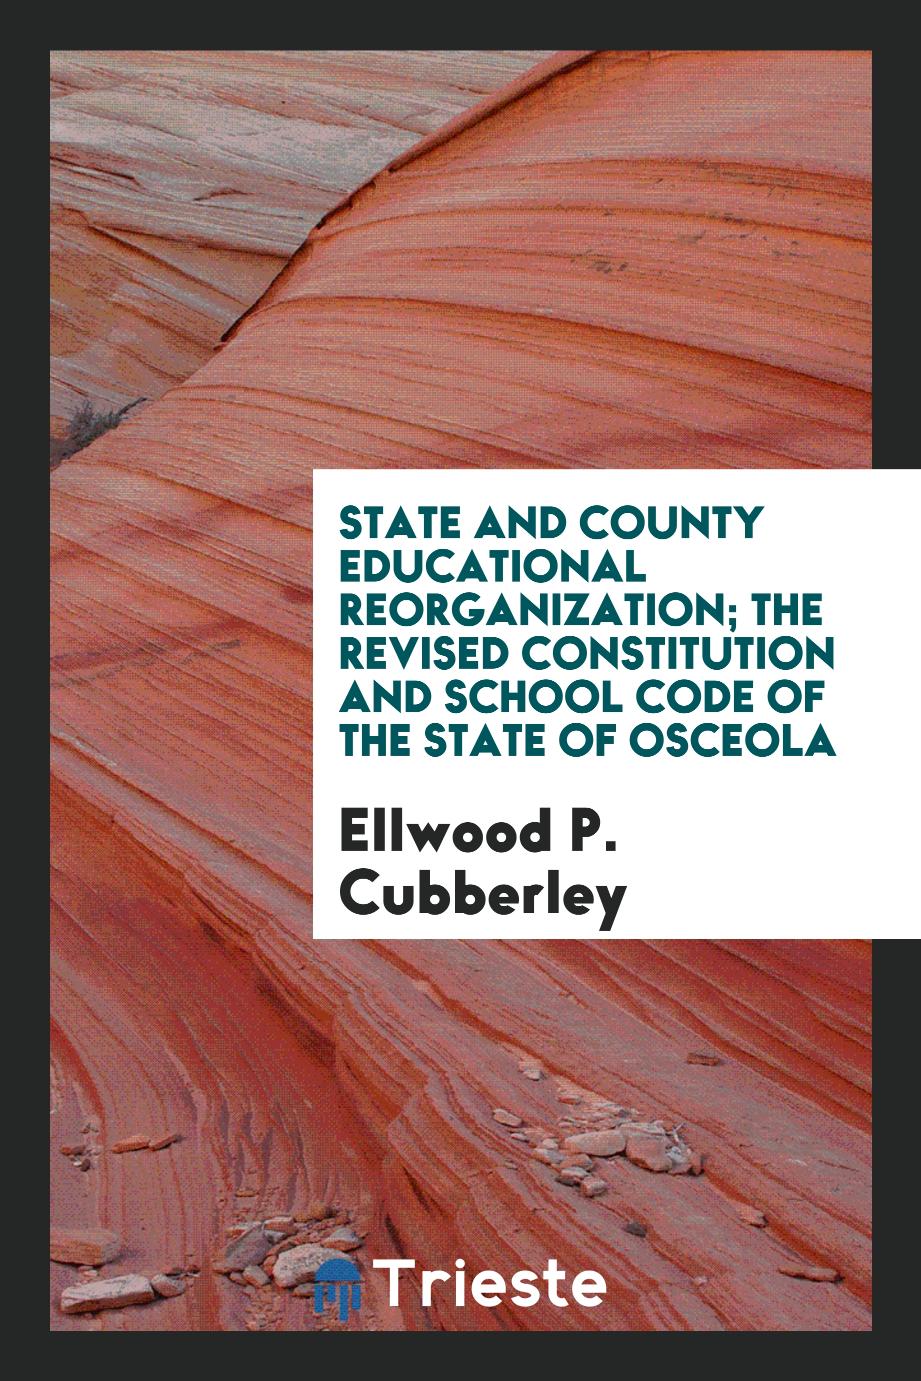 State and county educational reorganization; the revised constitution and school code of the state of Osceola